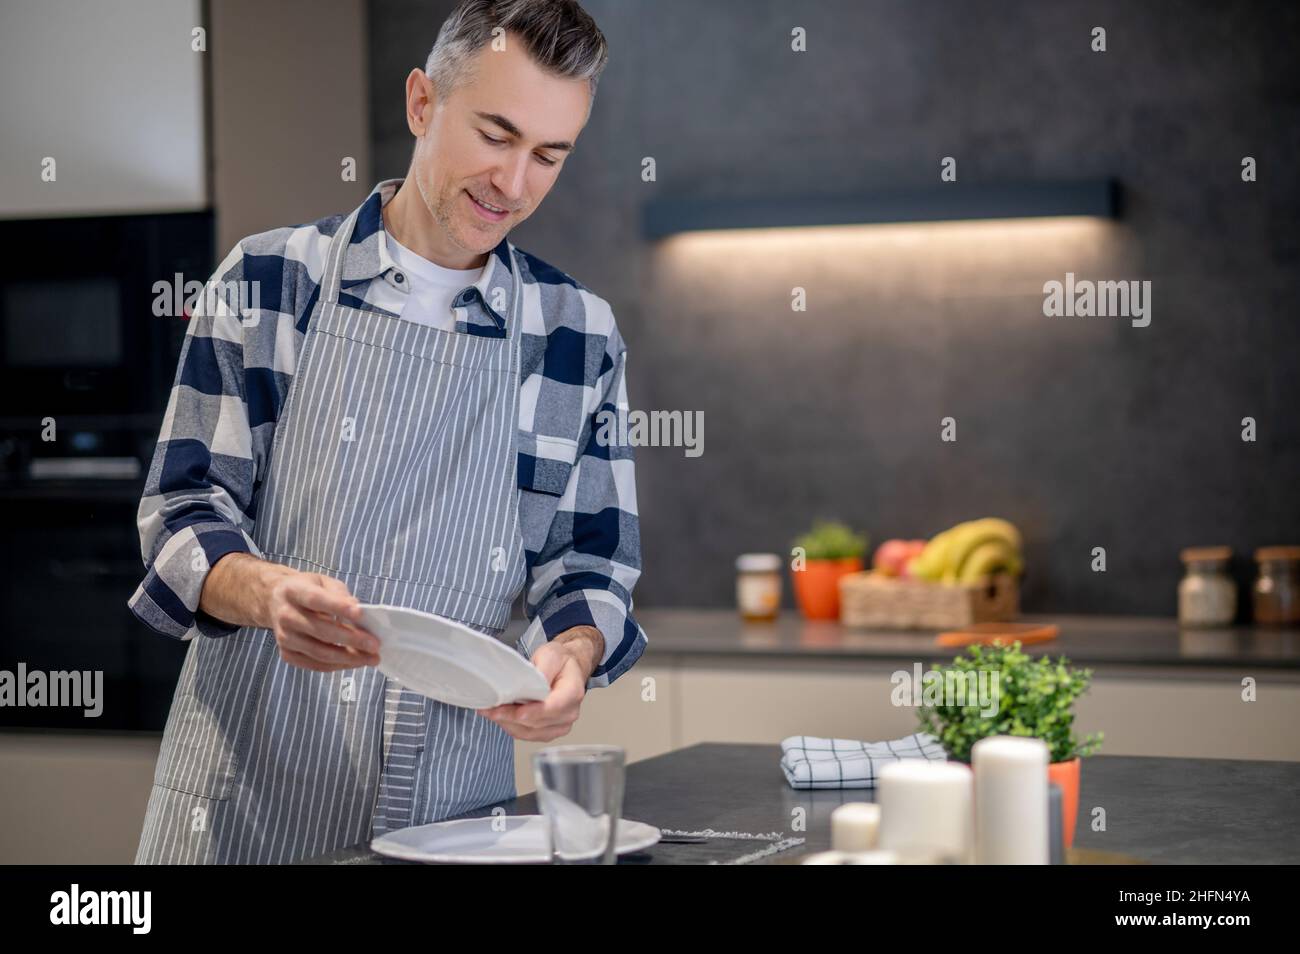 Man in apron examining plate in his hands Stock Photo